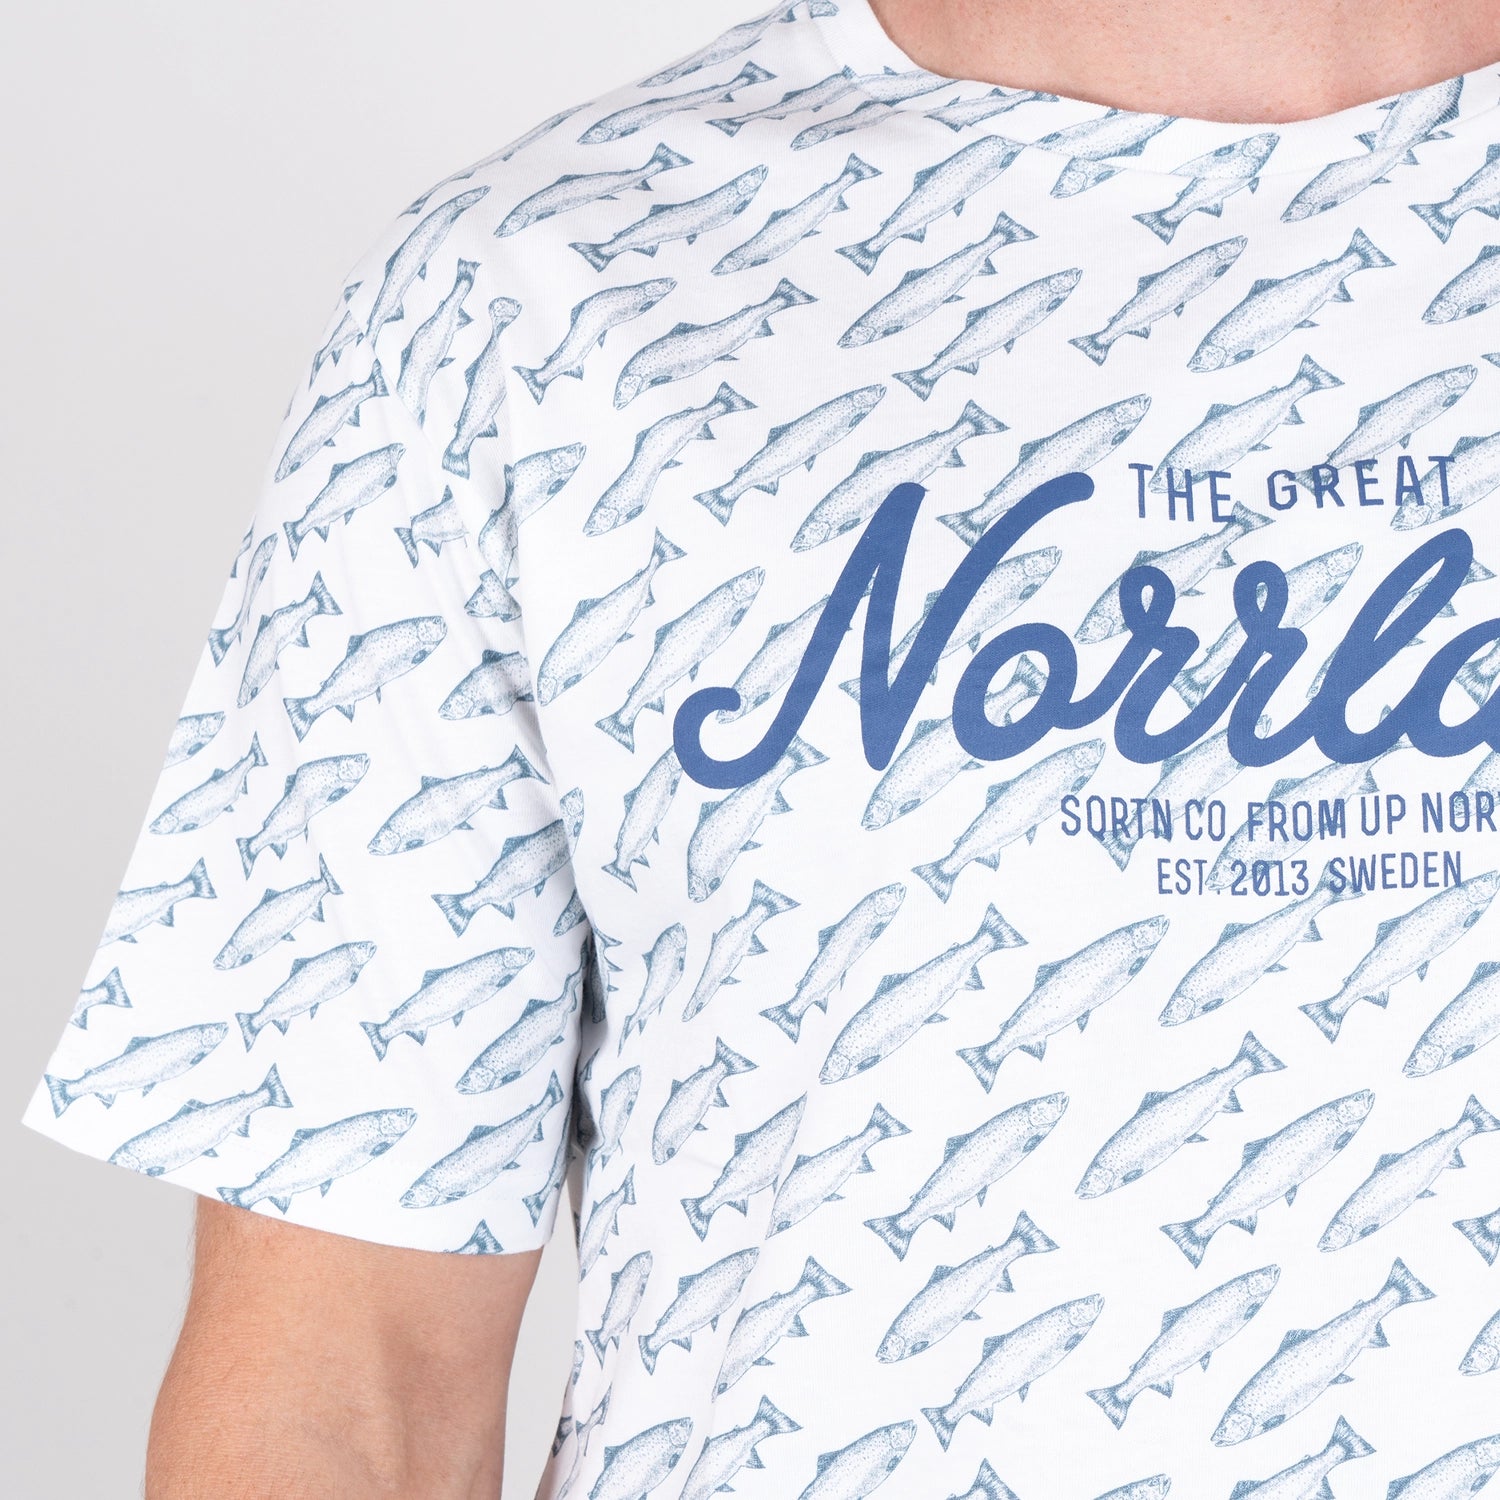 GREAT NORRLAND T-SHIRT - HAVSÖRING WHITE